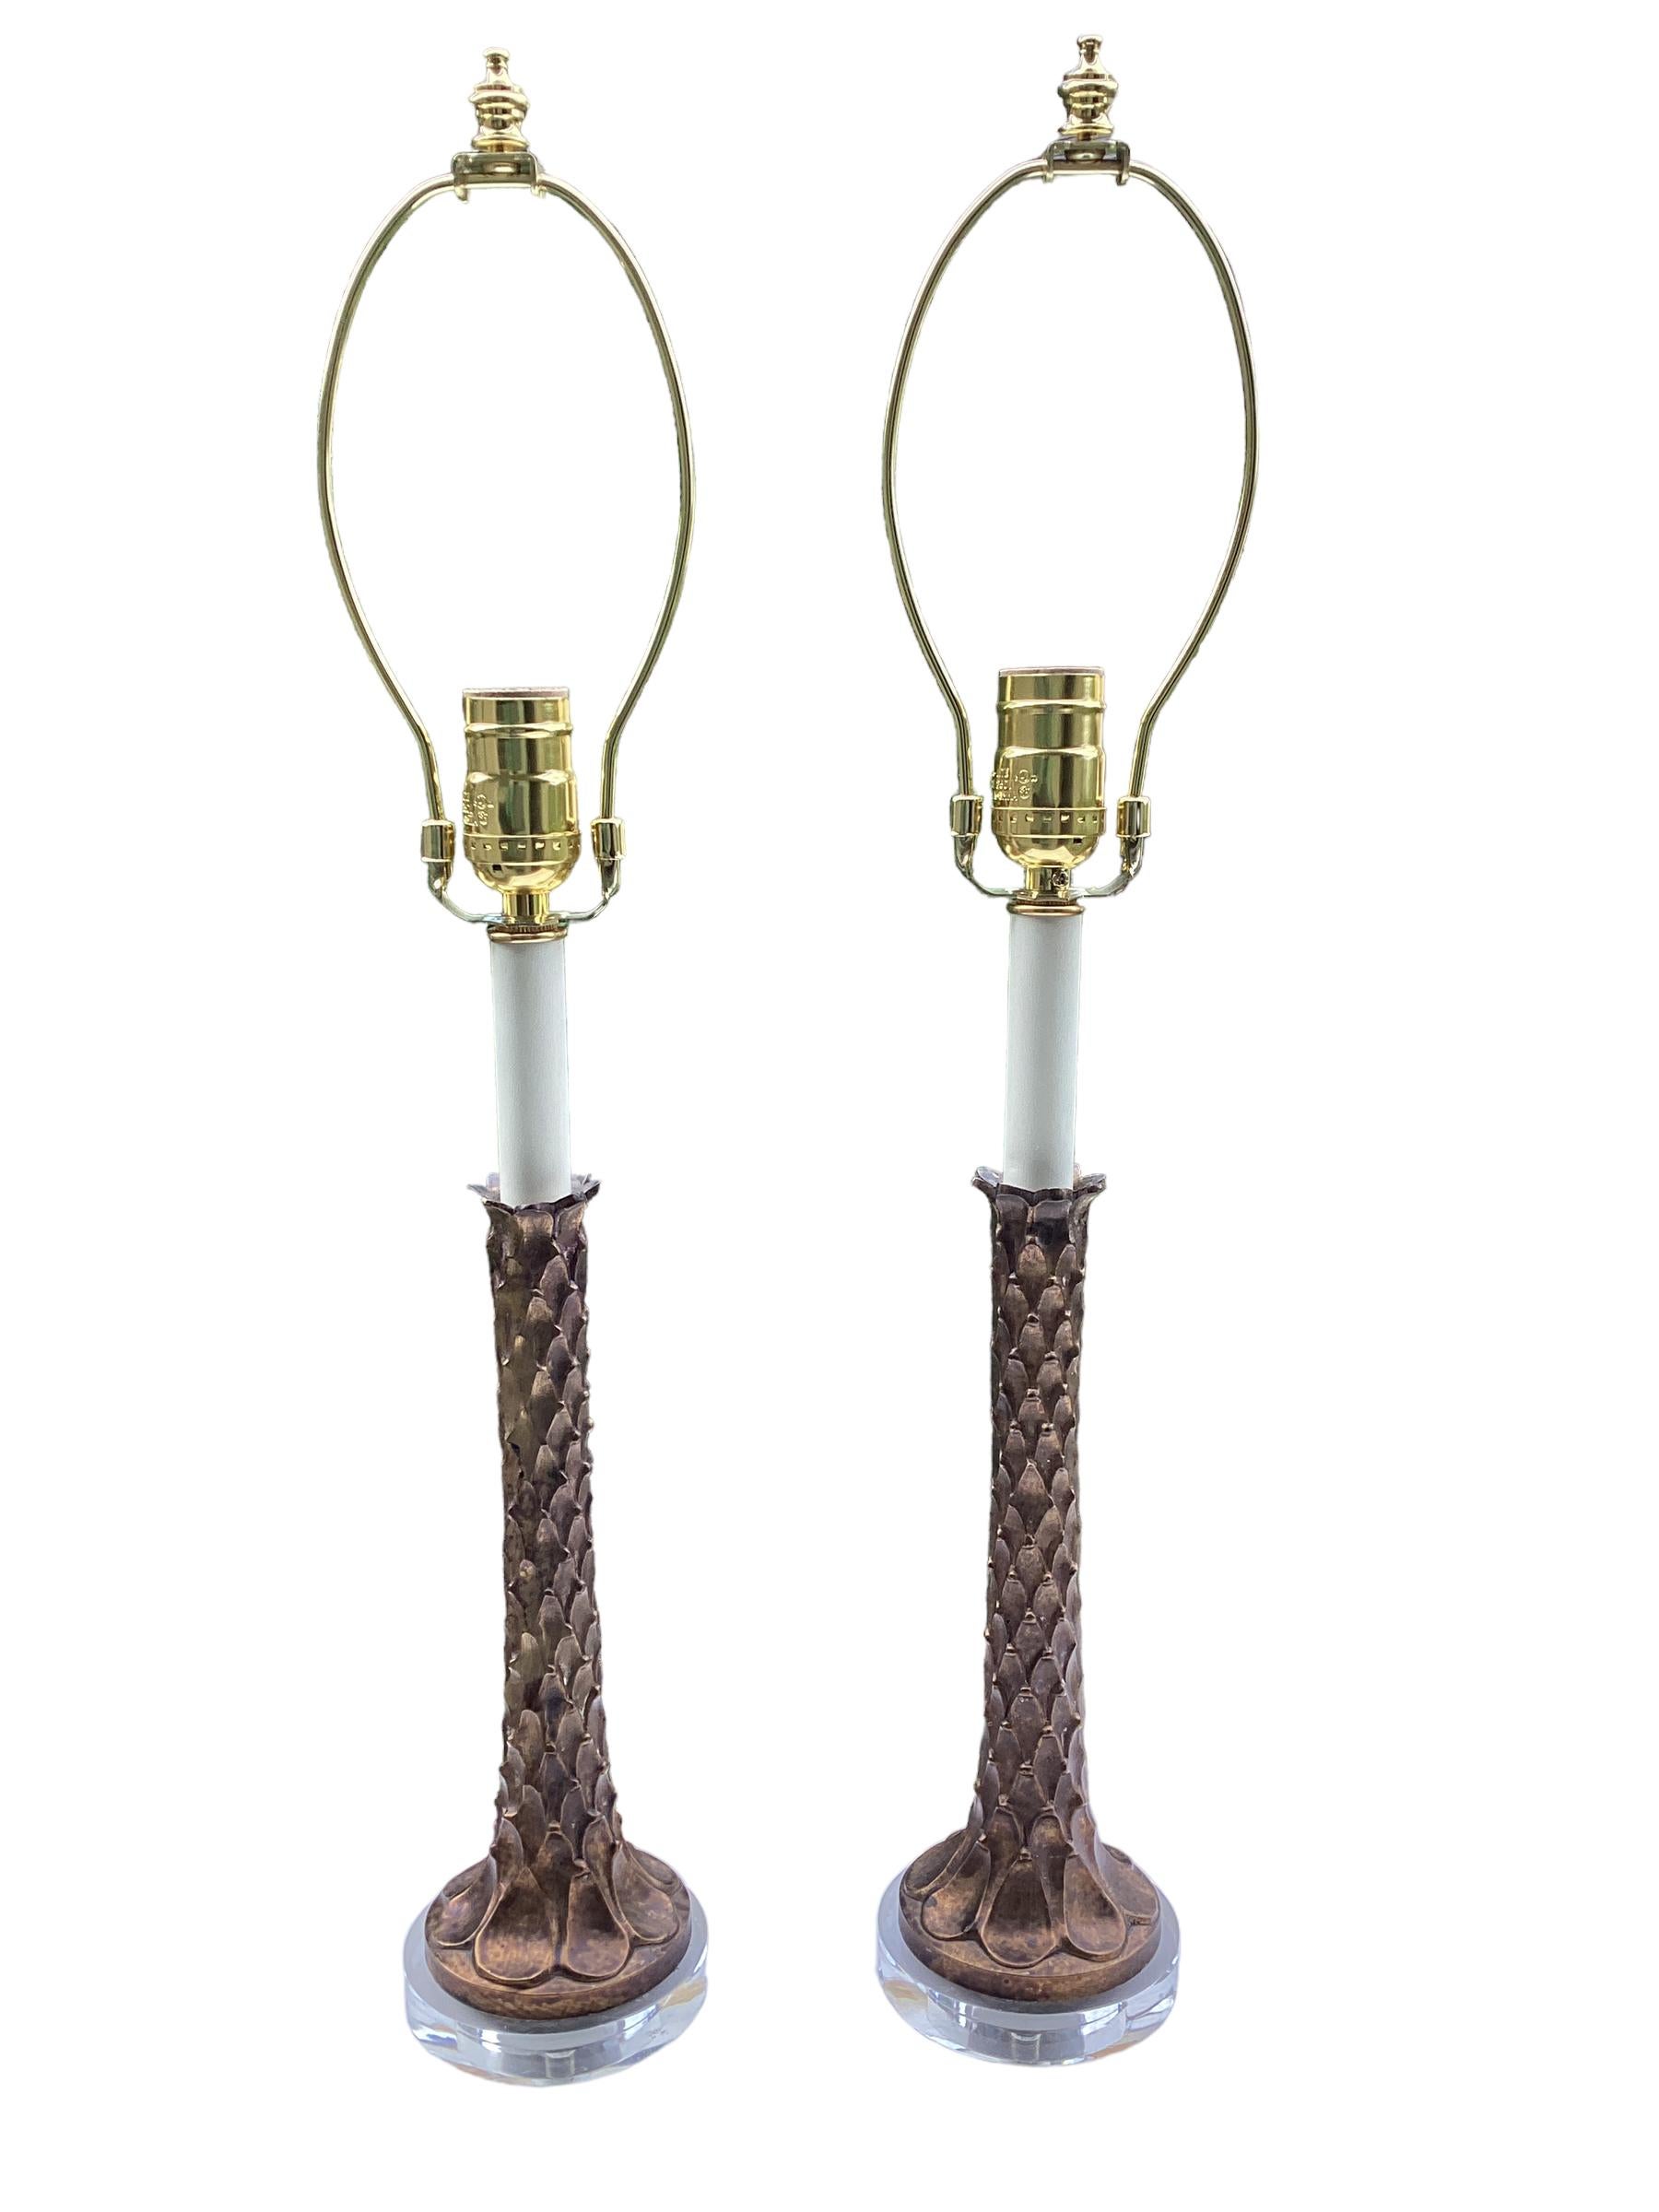 Pair of Brass Palm Tree Candlestick Lamps. Palm tree form shaft mounted on round lucite bases to give candlesticks a modern twist. Lamps are newly wired and have a 3-way socket for plenty of light.